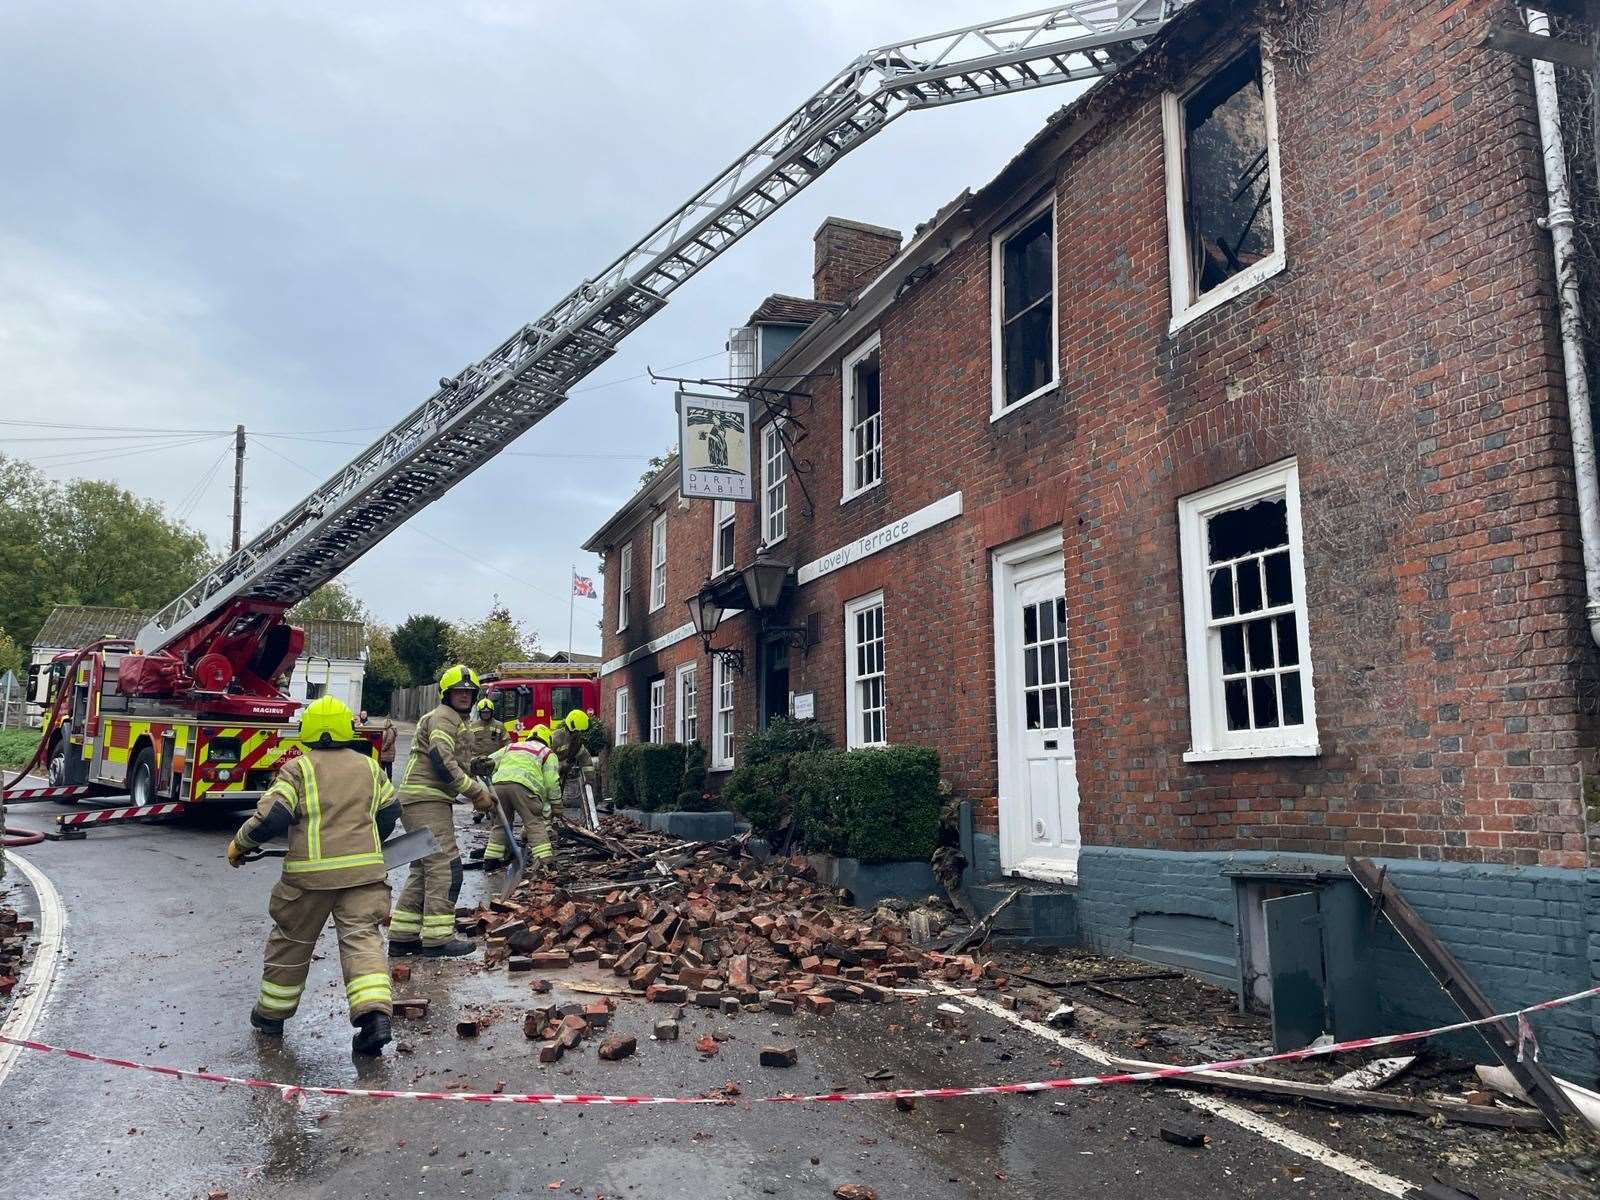 Rubble strewn all over Upper Street, Hollingbourne, after the fire at The Dirty Habit. Picture: Sean McPolin